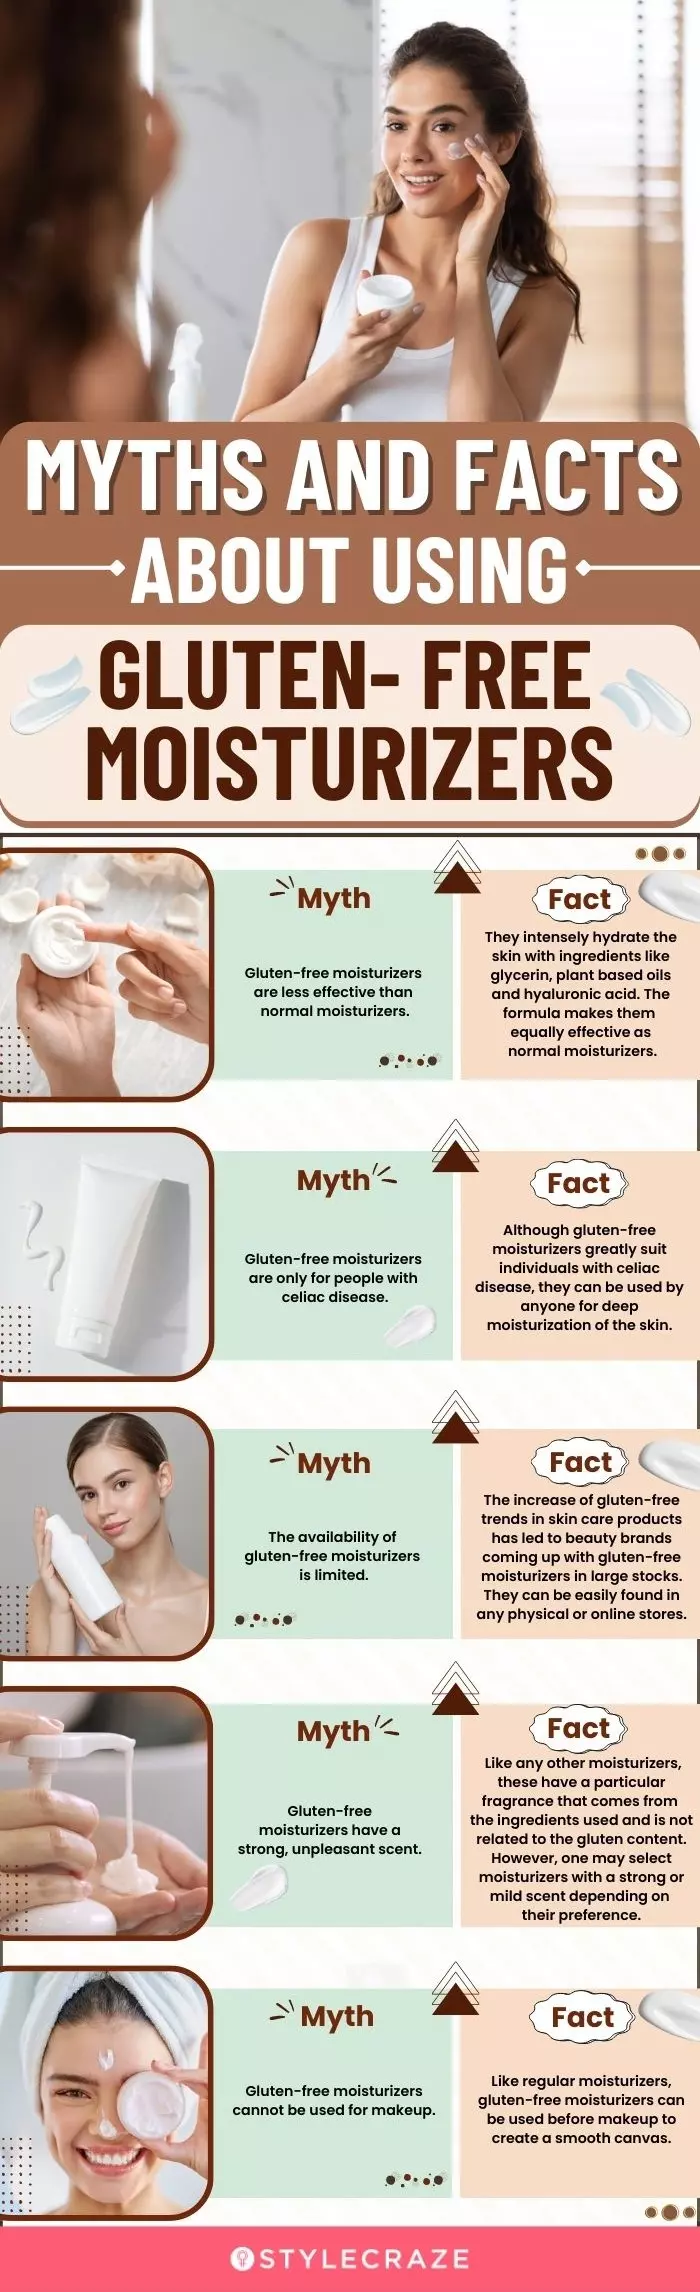 Myths And Facts About Using Gluten-Free Moisturizers (infographic)